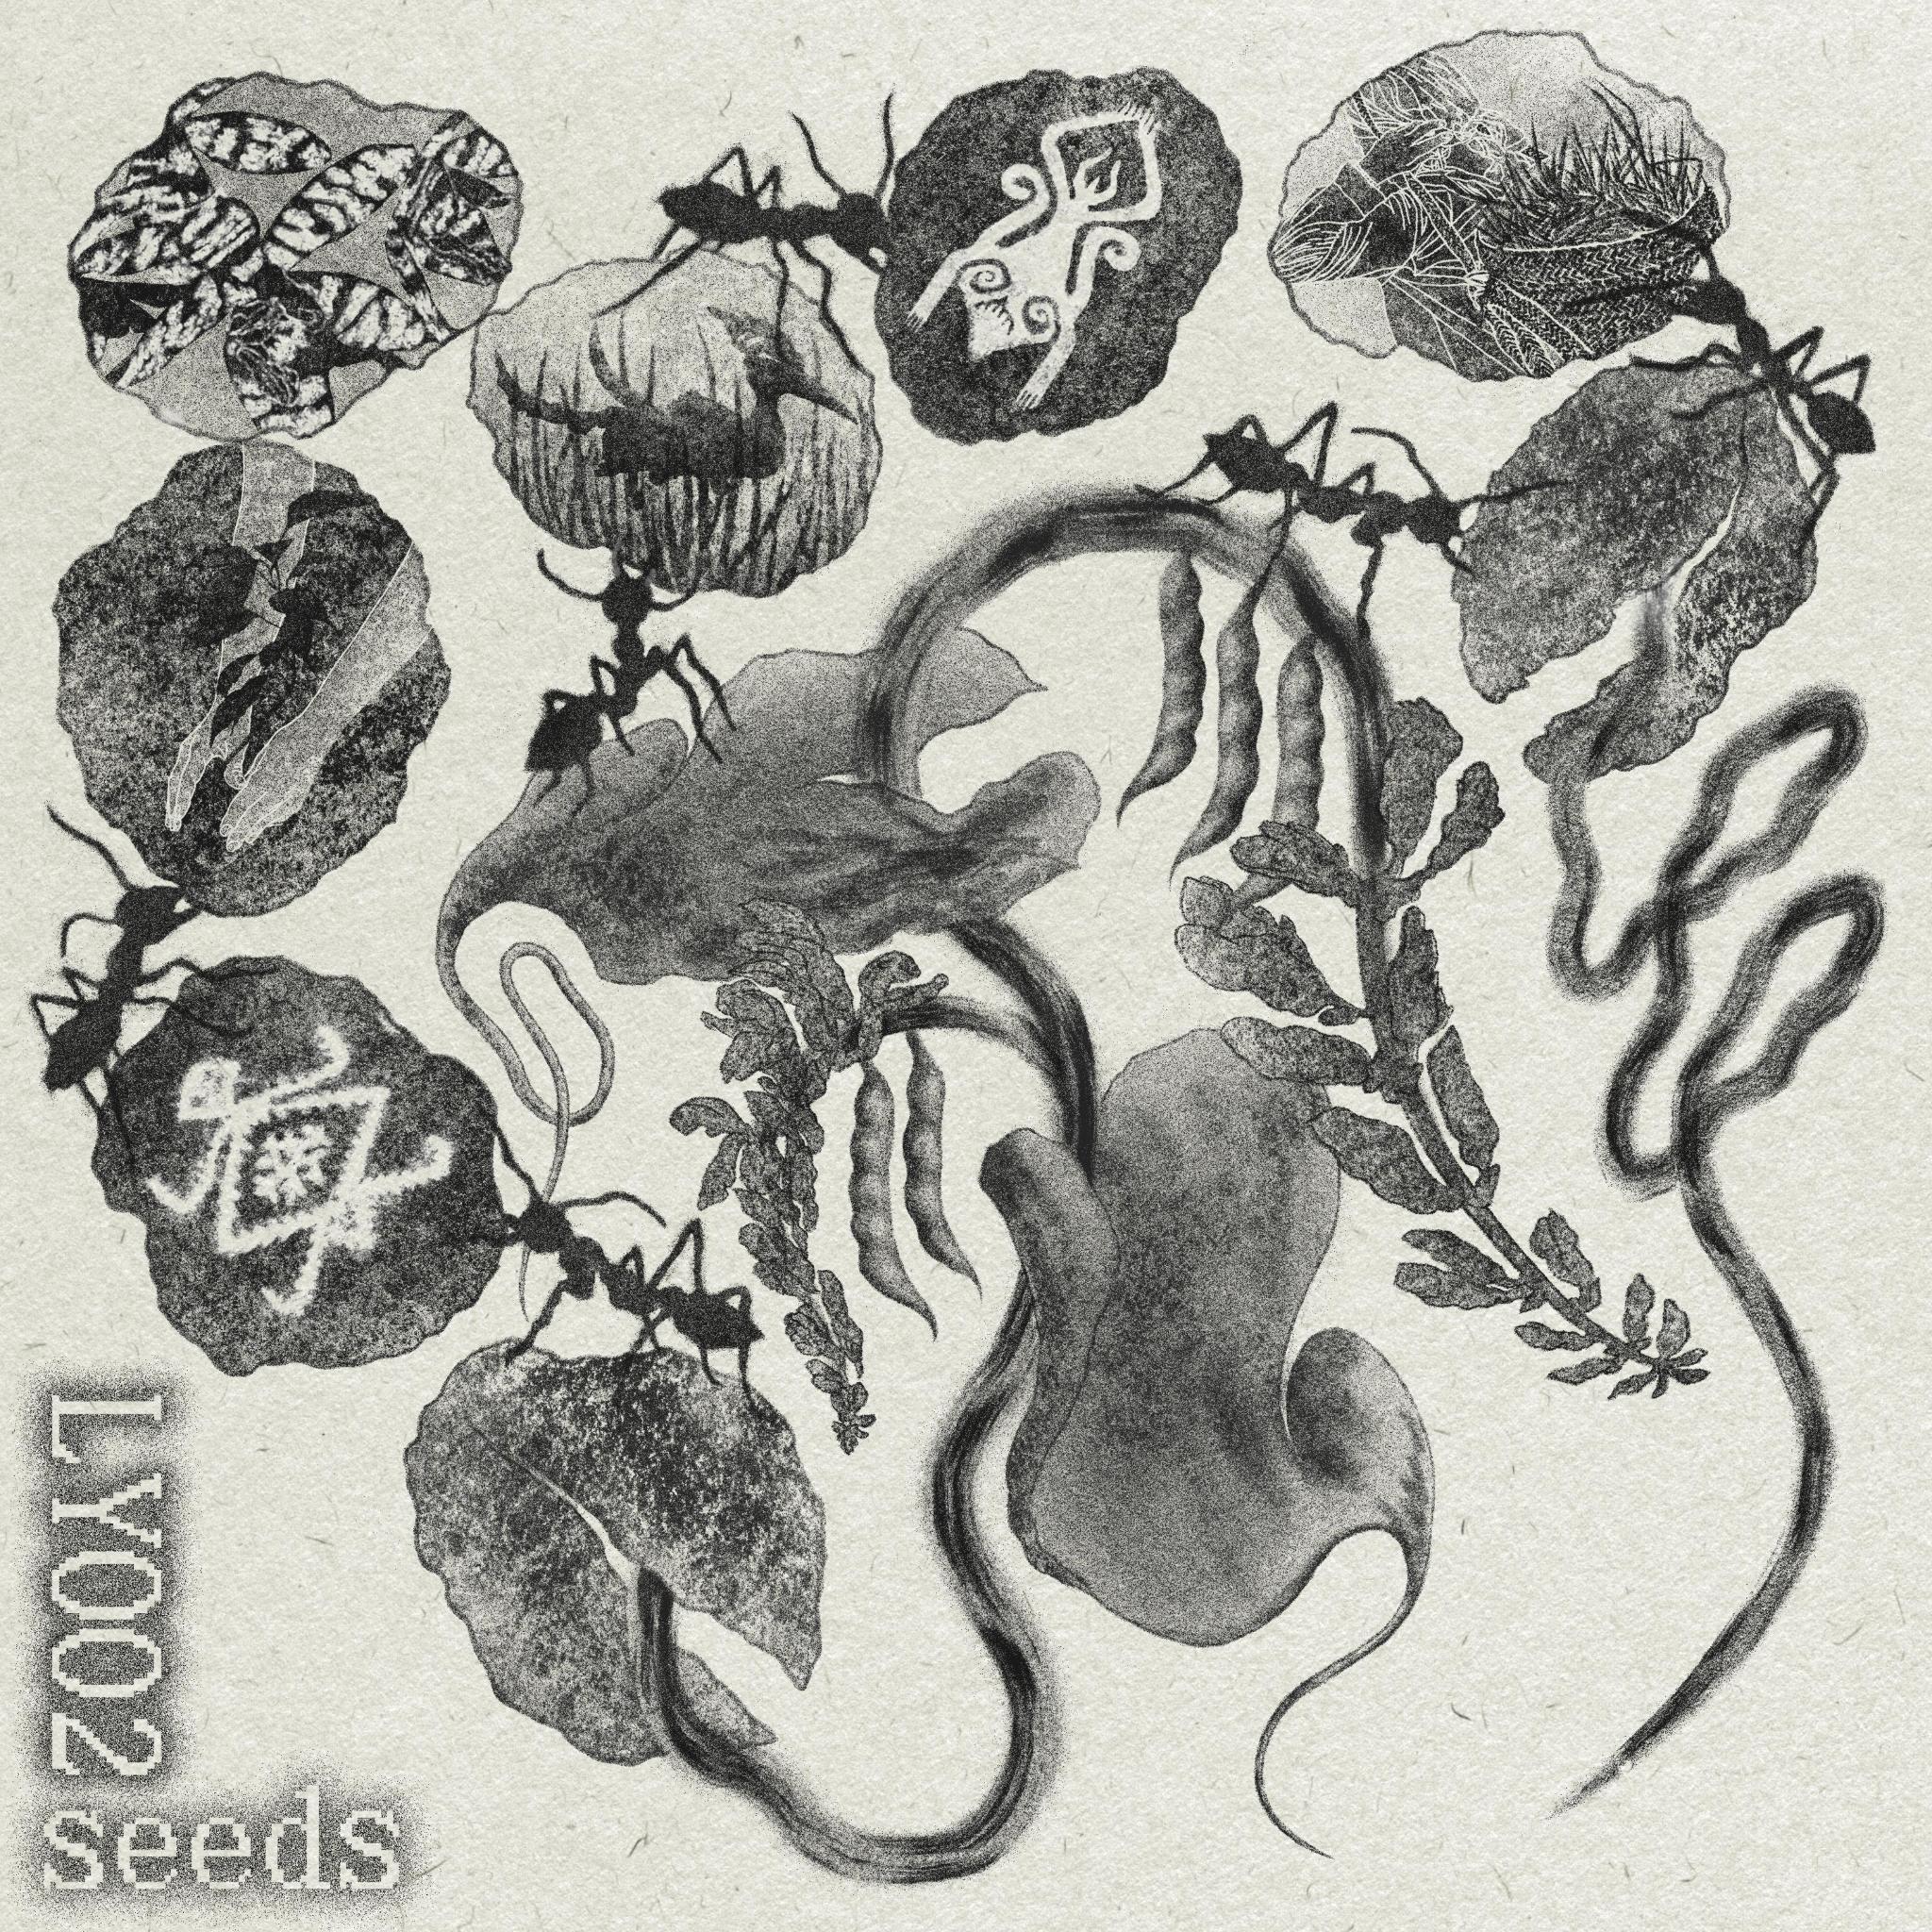 Image Description: The album cover of the mixtape features sketches of a plant sprouting and carpenter ants carrying seeds with Lumad imagery.